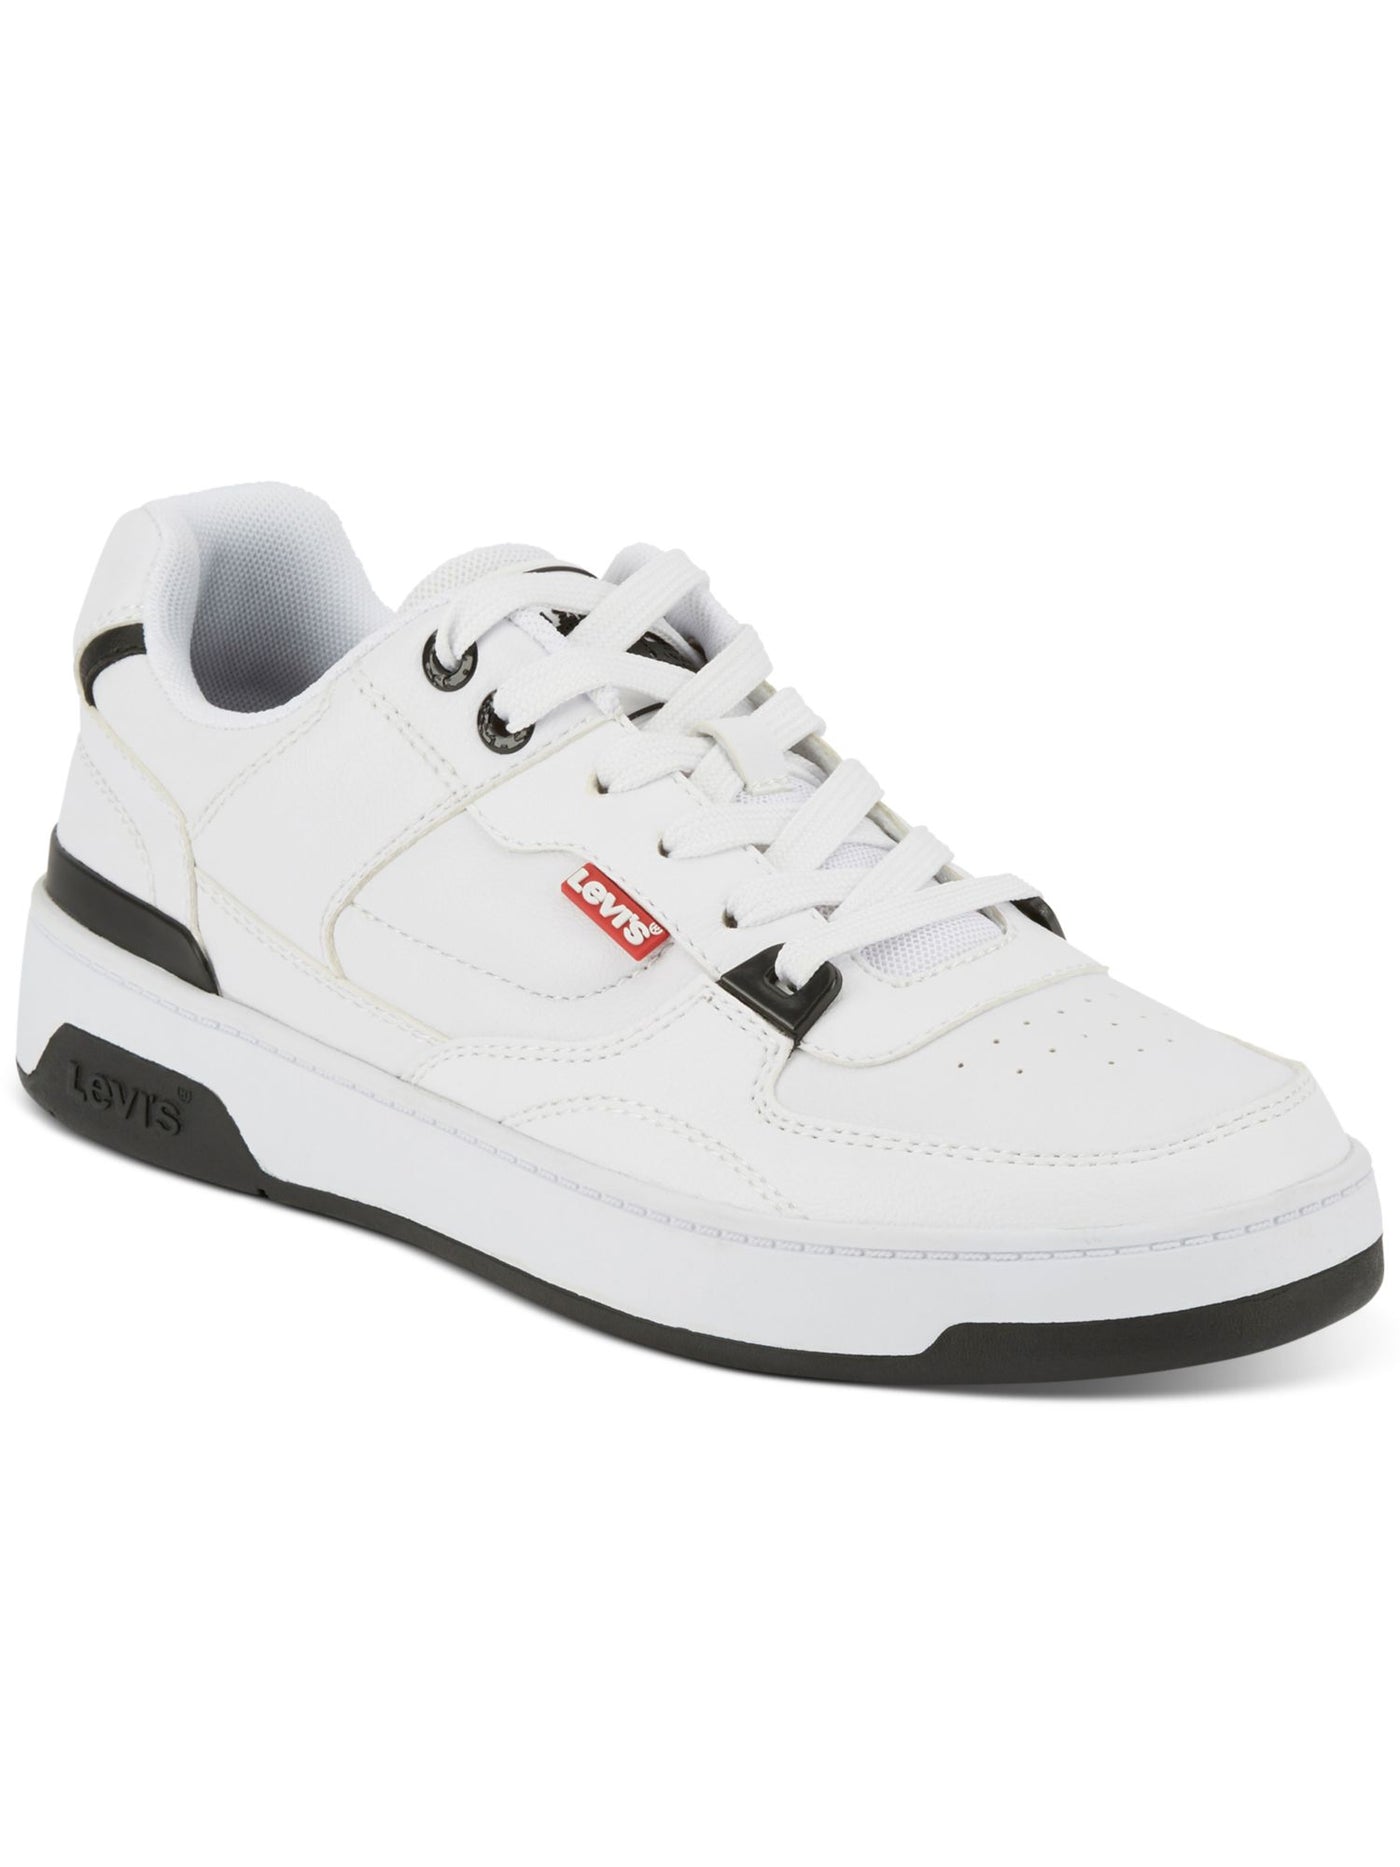 LEVI'S Mens White Mixed Media Cushioned 521 Mod Round Toe Lace-Up Sneakers Shoes 12